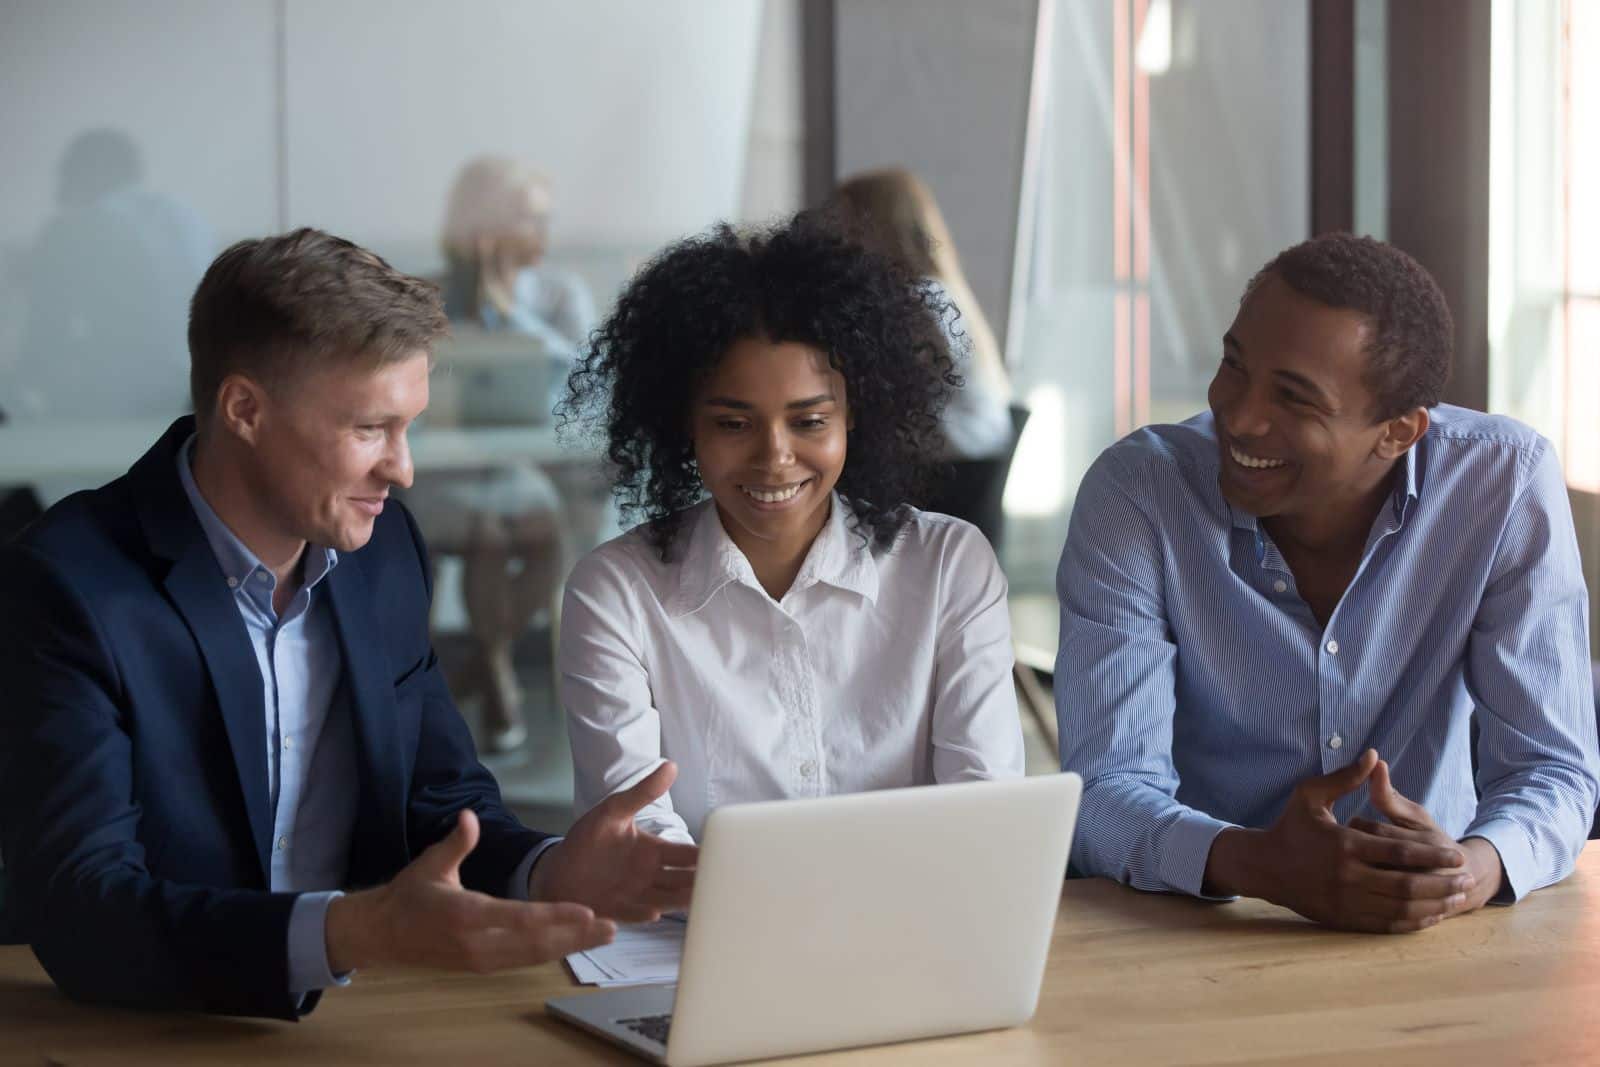 Image Credit: Shutterstock / fizkes <p><span>Diverse workplaces tend to perform better financially and are more innovative, as they bring multiple perspectives to the table.</span></p>